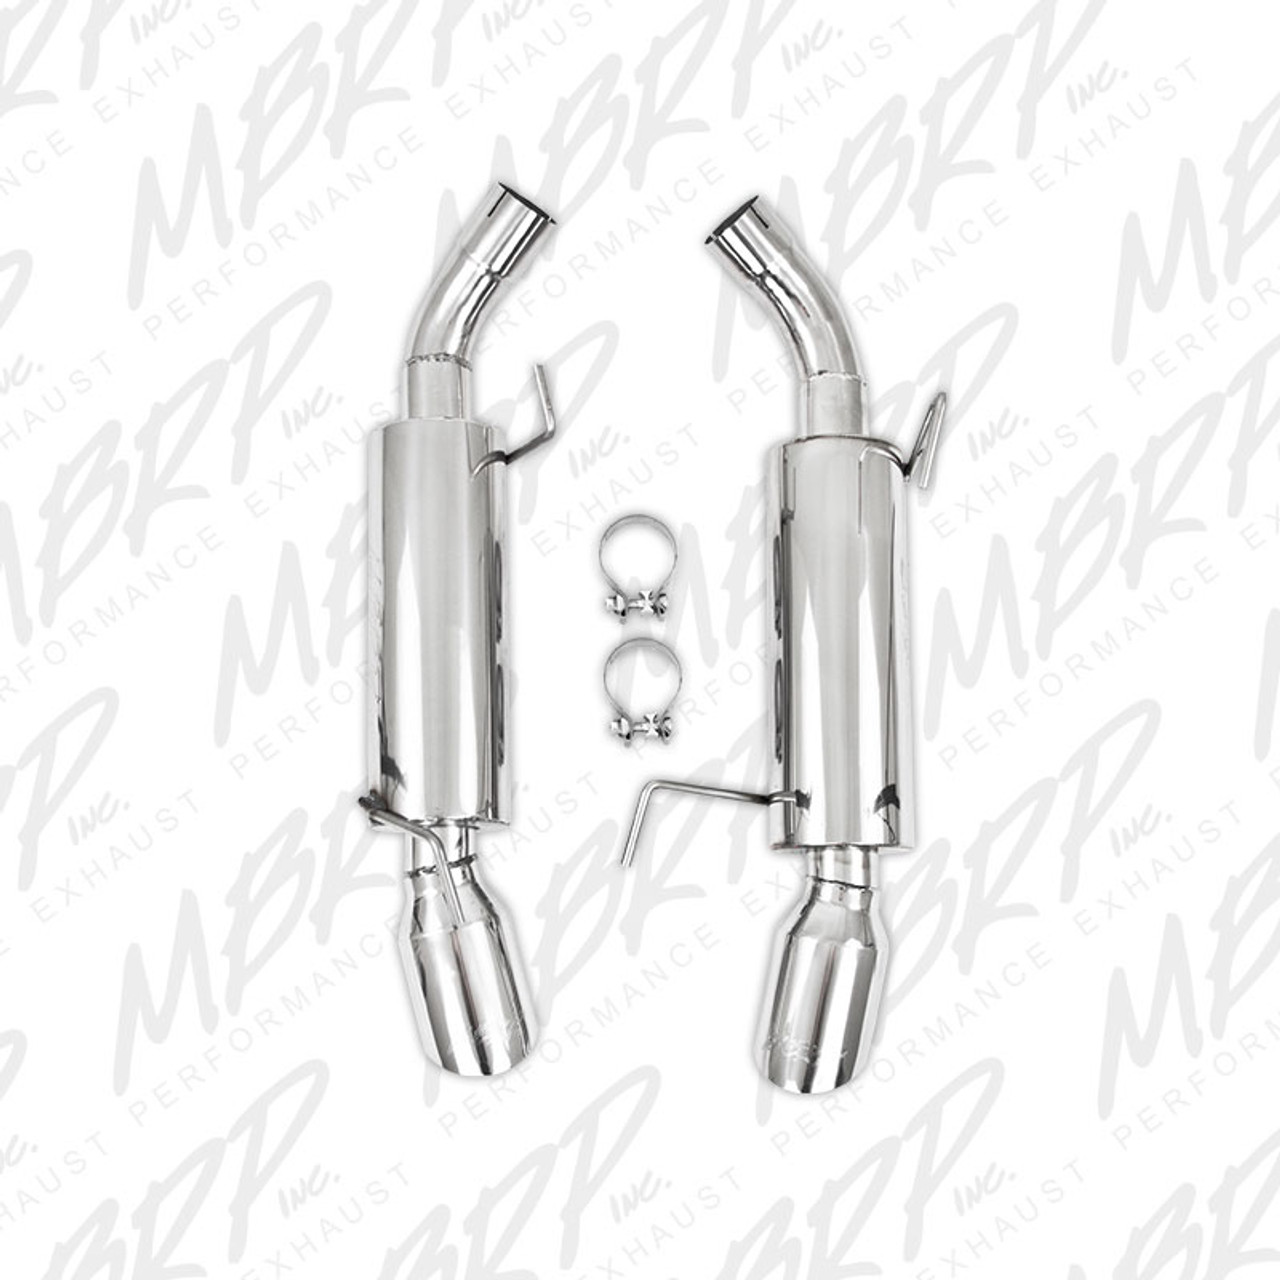 S7200304 - MBRP DUAL MUFFLER EXHAUST 2005-2010 FORD MUSTANG GT 4.6L 2007-2010 FORD SHELBY GT500